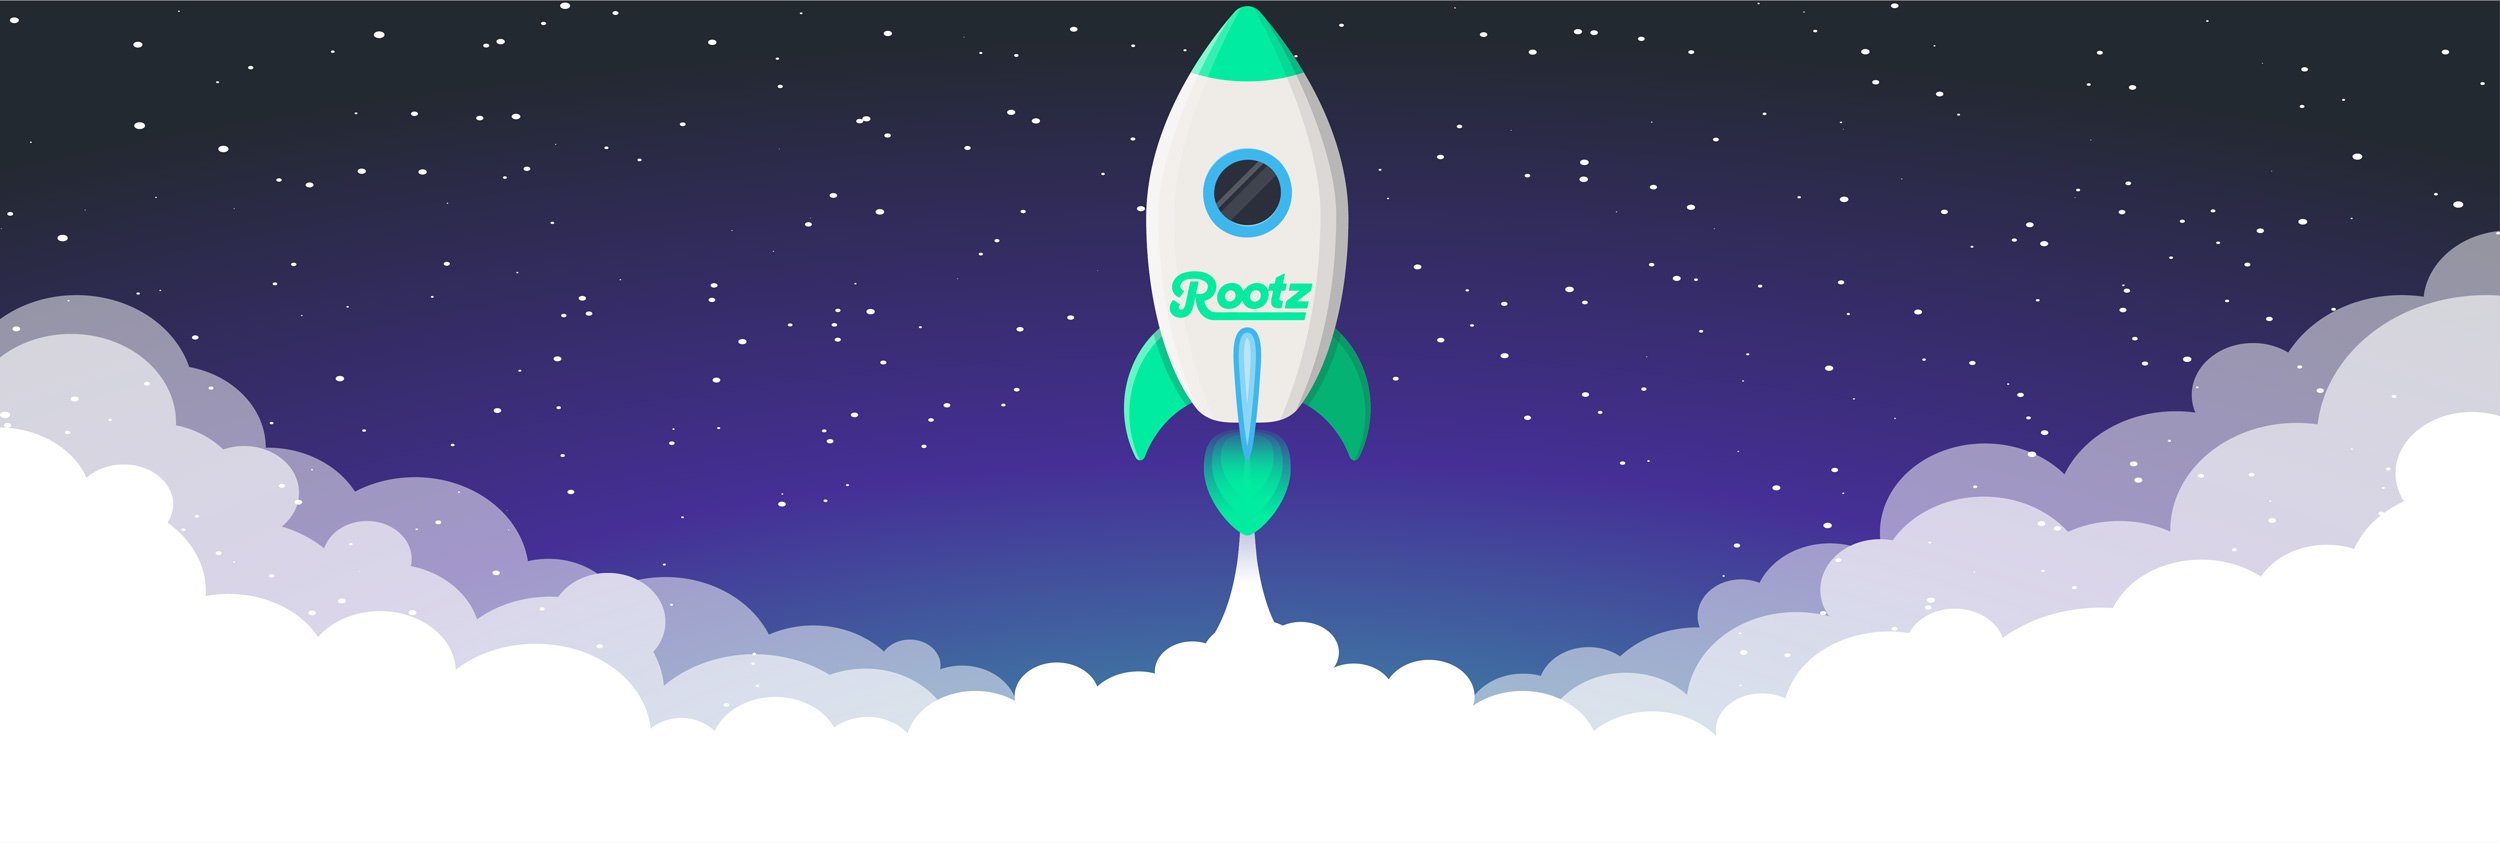 How Rootz increased their Net Gaming Revenue by up to 100%